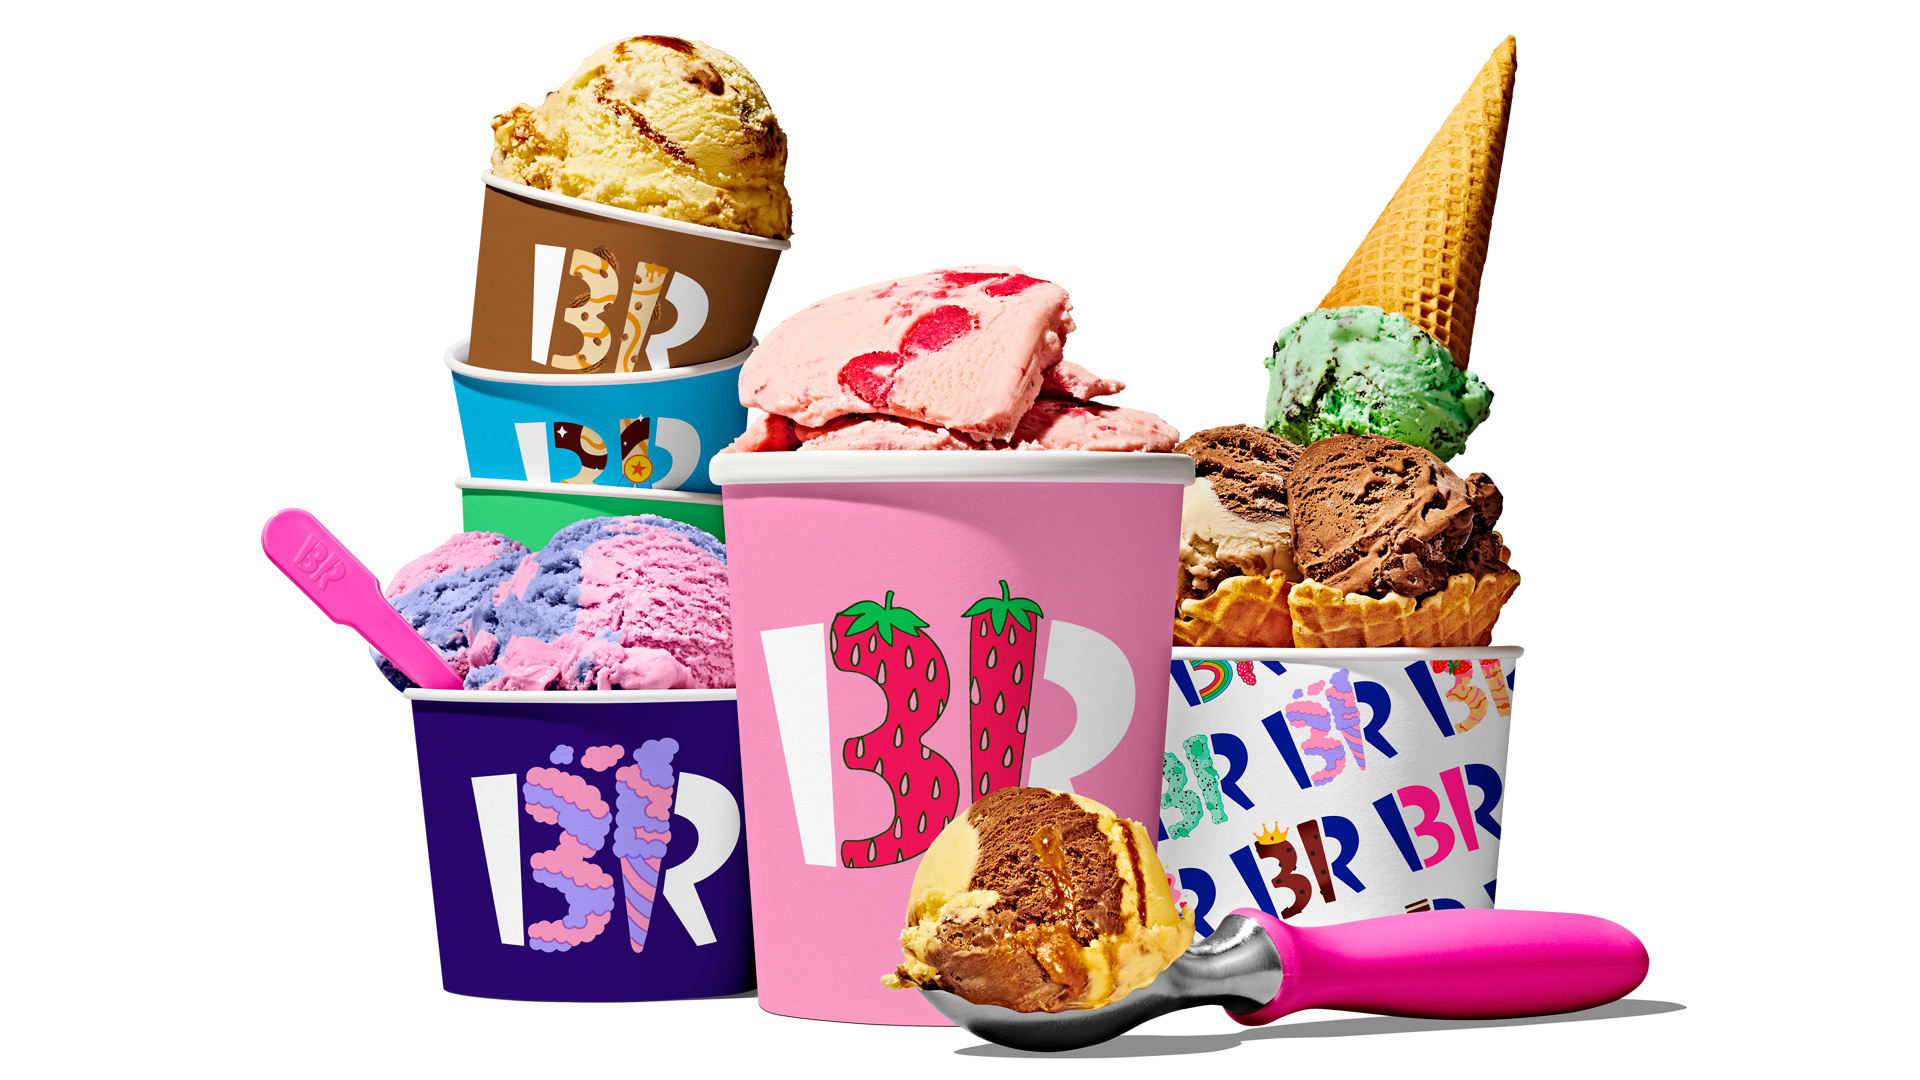 Baskin Robbins: More than 500 flavors by the time of the 31st anniversary, 2,500 shops in the US. 1920x1080 Full HD Background.